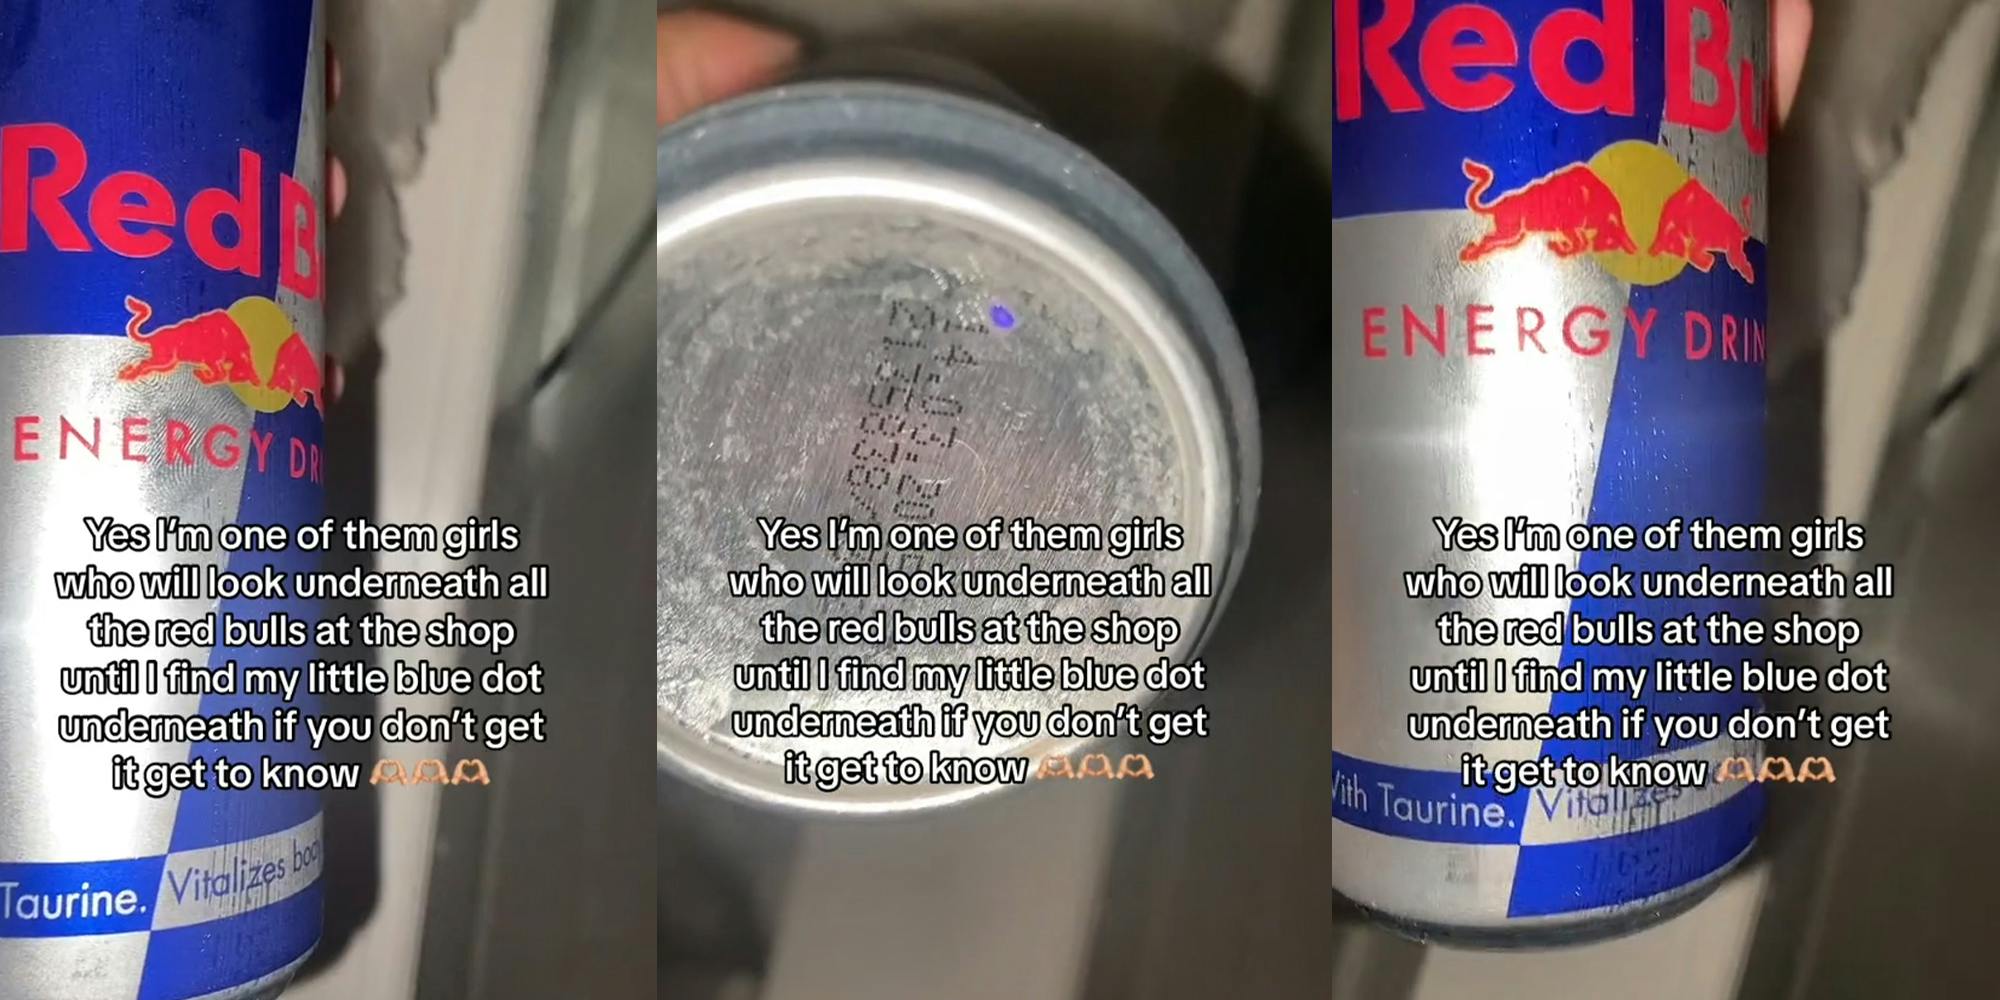 blue dot redbull: People are trying to find small blue dots under Red Bull cans at the 7/11